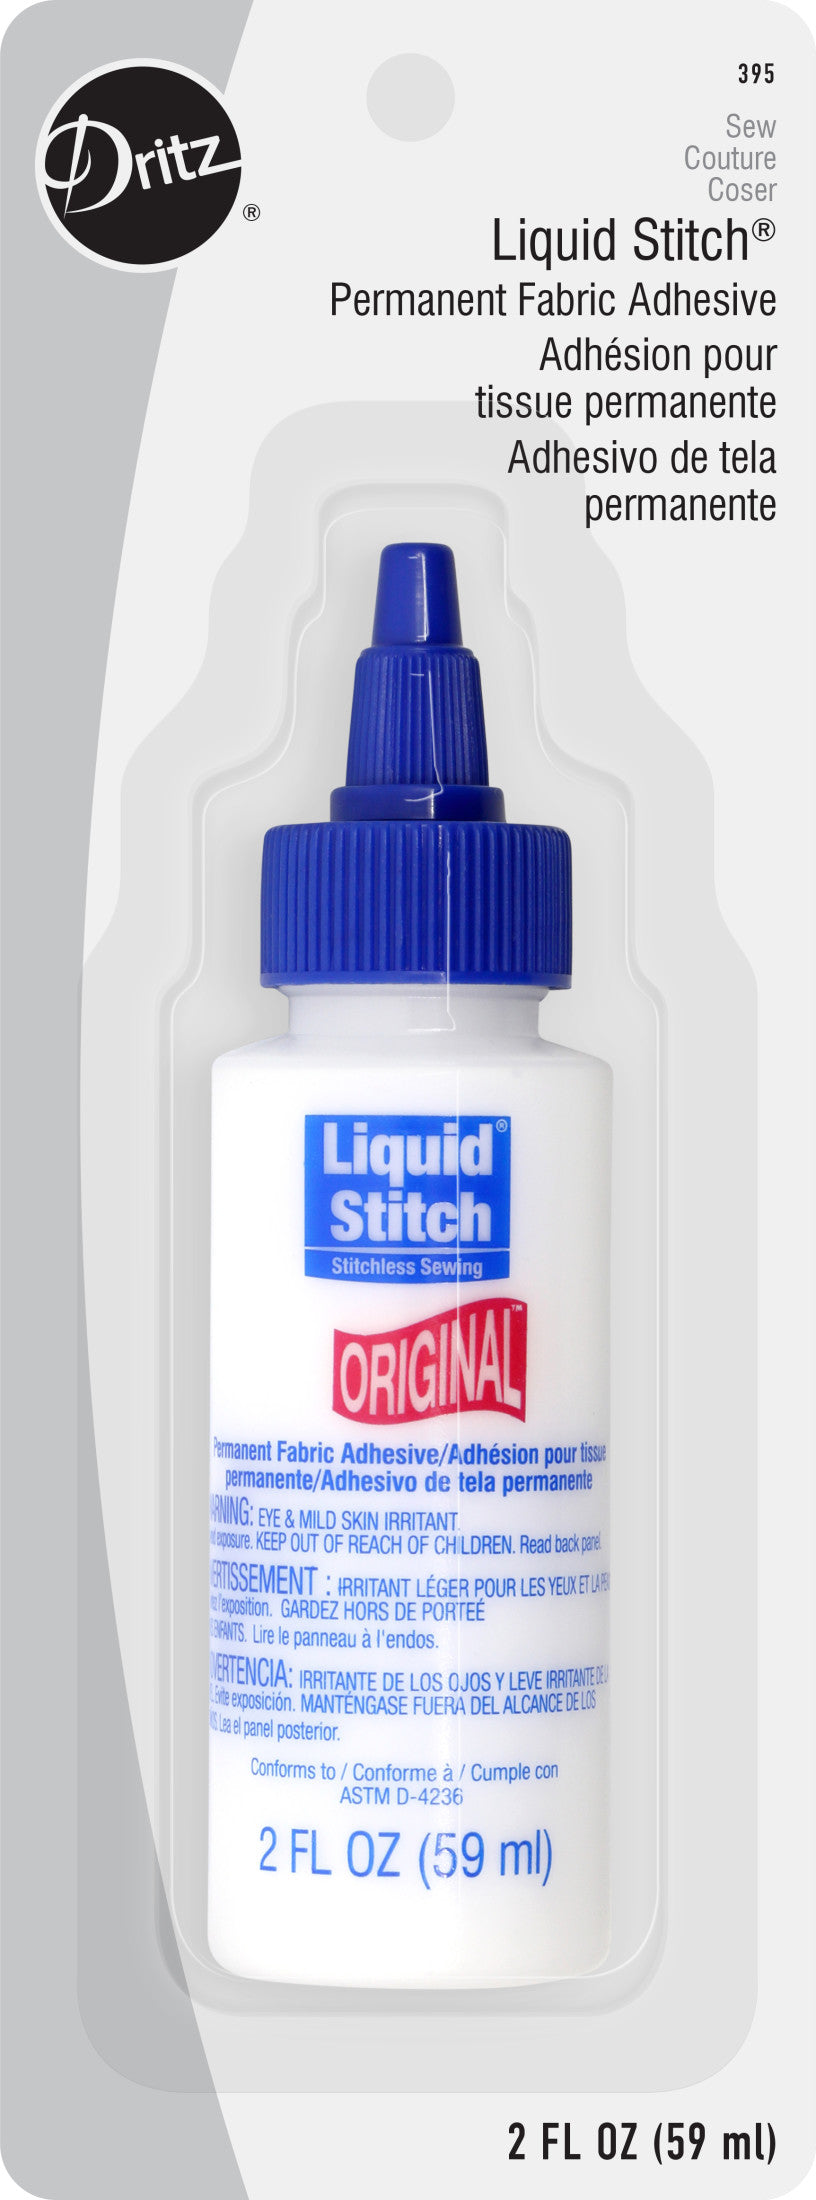 5 Best Fabric Glues, Perfect for Alterations, Mending, & Hemming Apparel